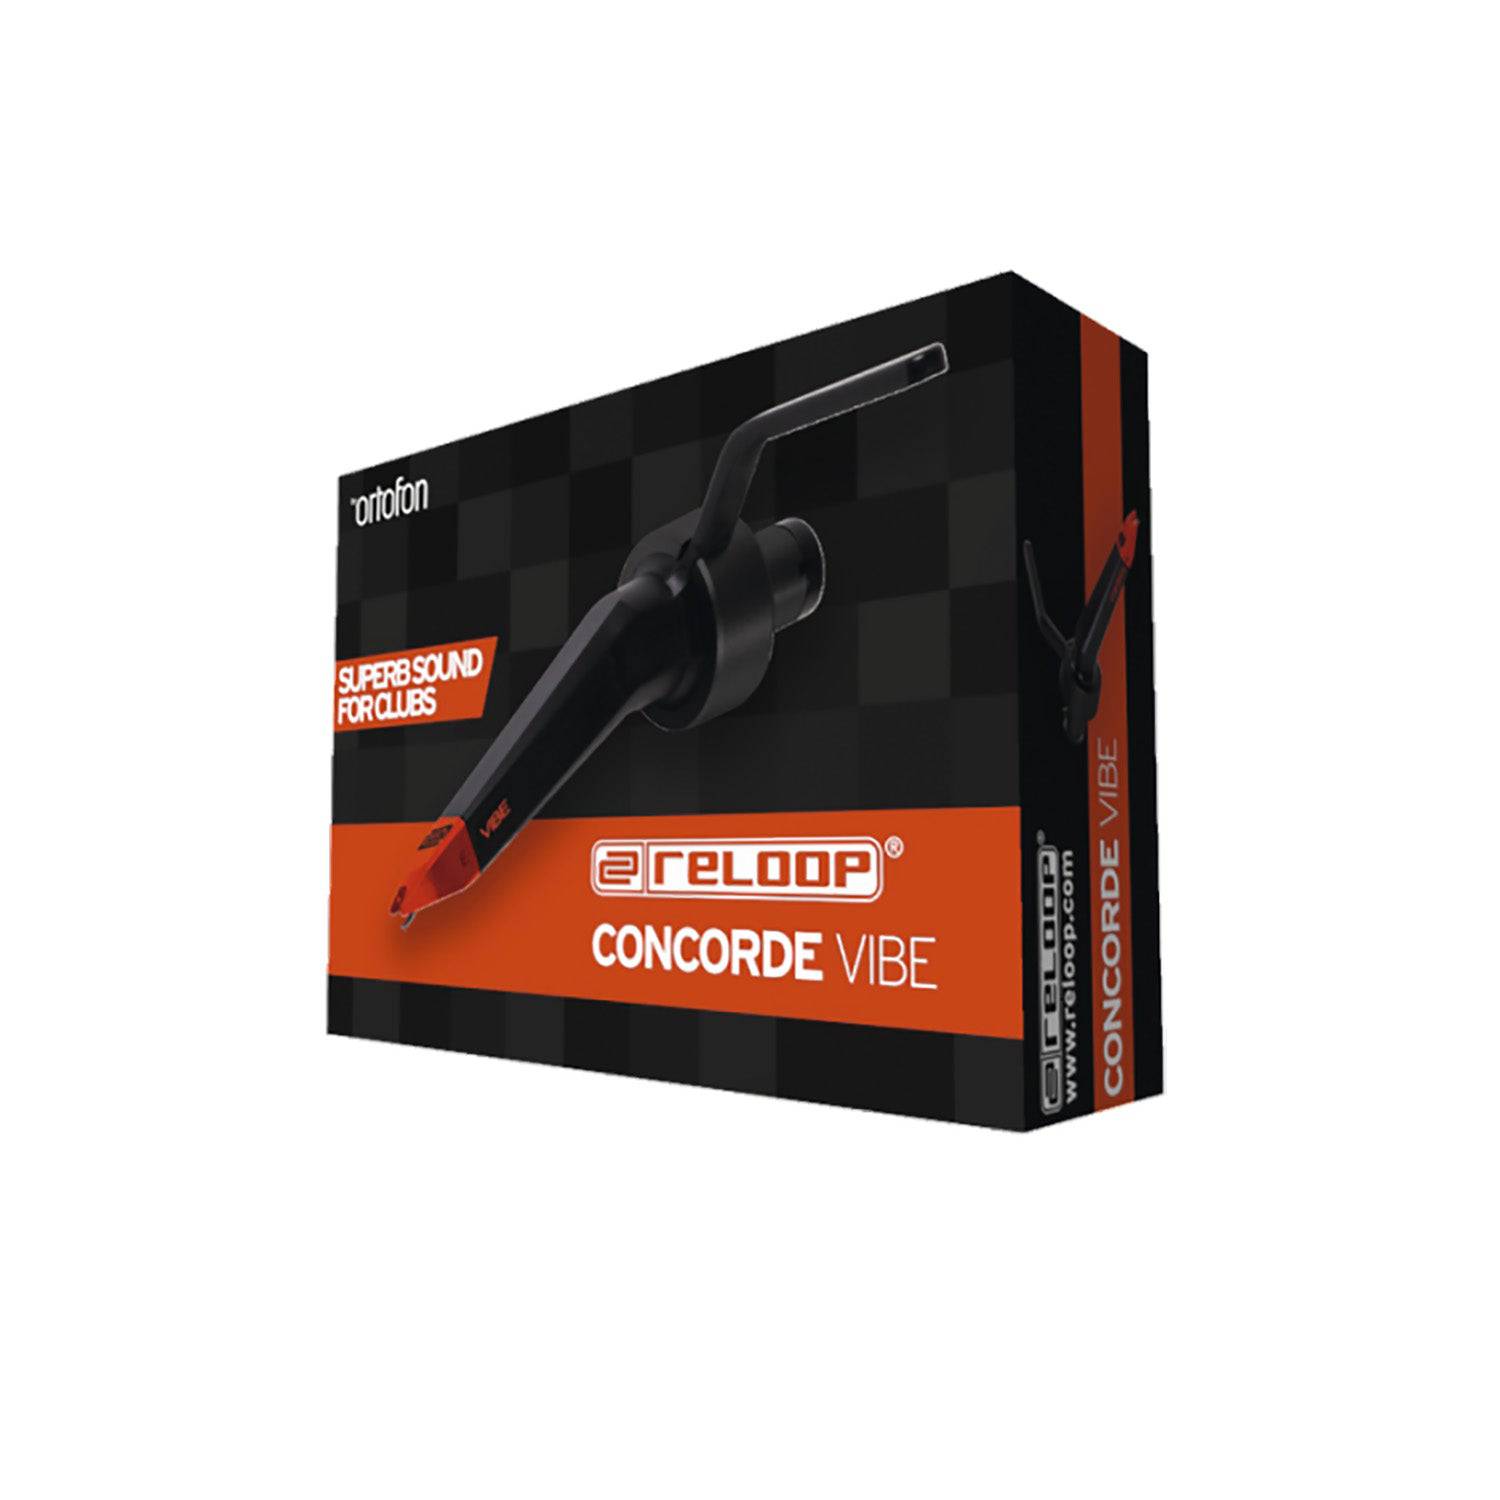 Reloop AMS-CONCORDE-VIBE Concorde VIBE Turntable Catridge With Stylus - Hollywood DJ